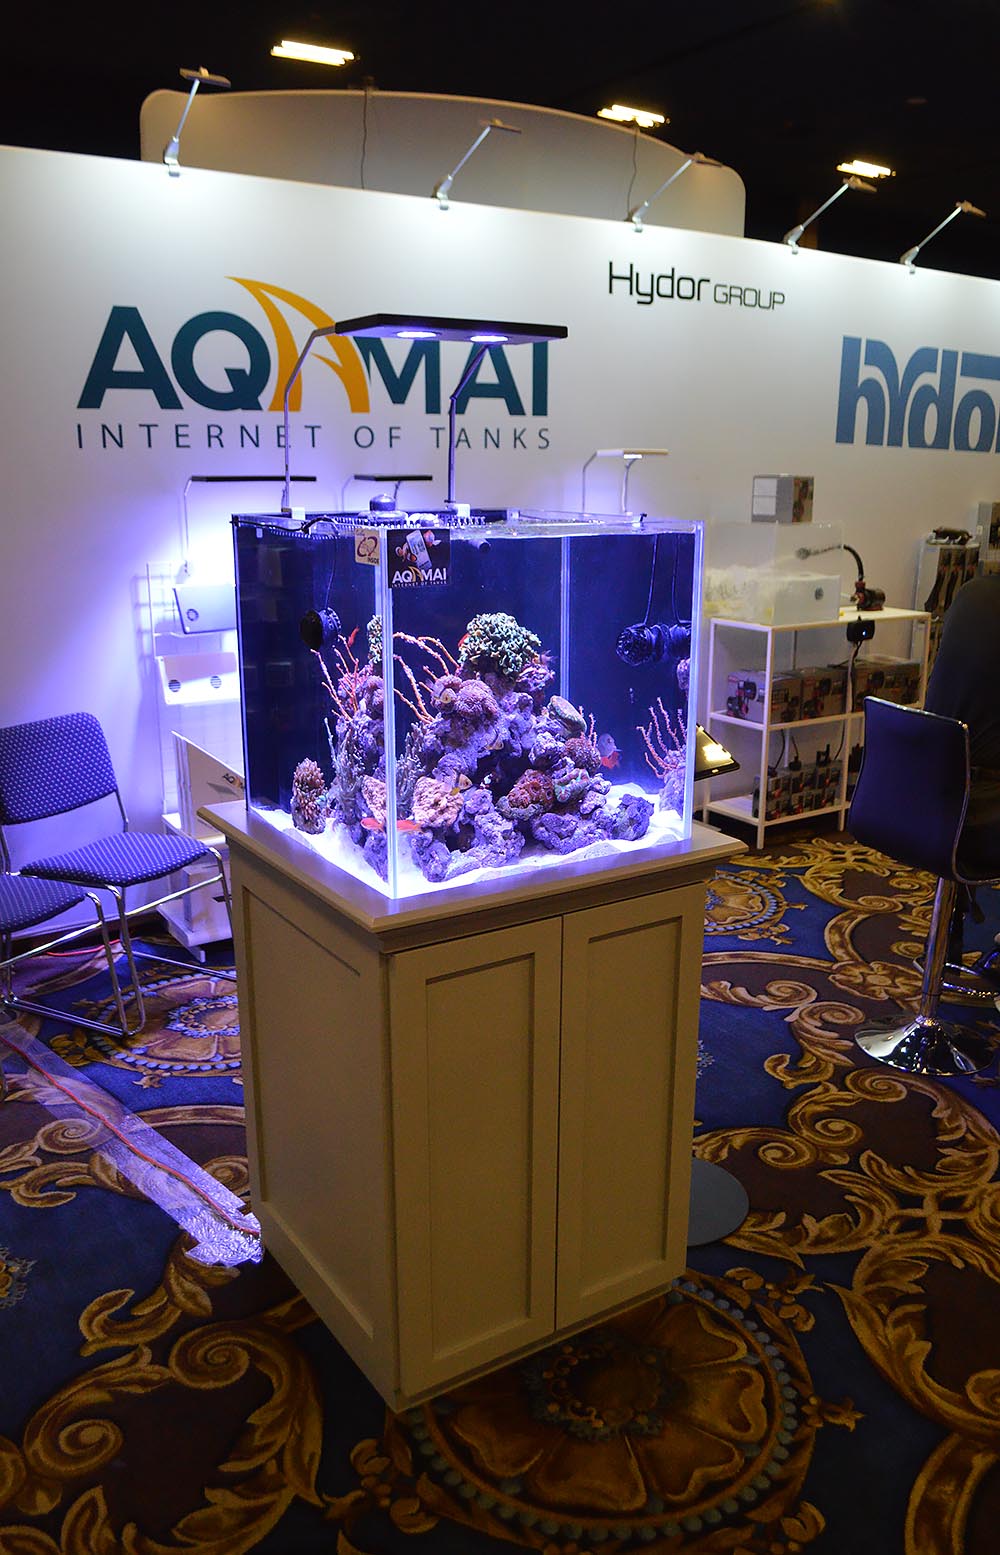 Hydor Group's booth included this nice rimless tank setup.